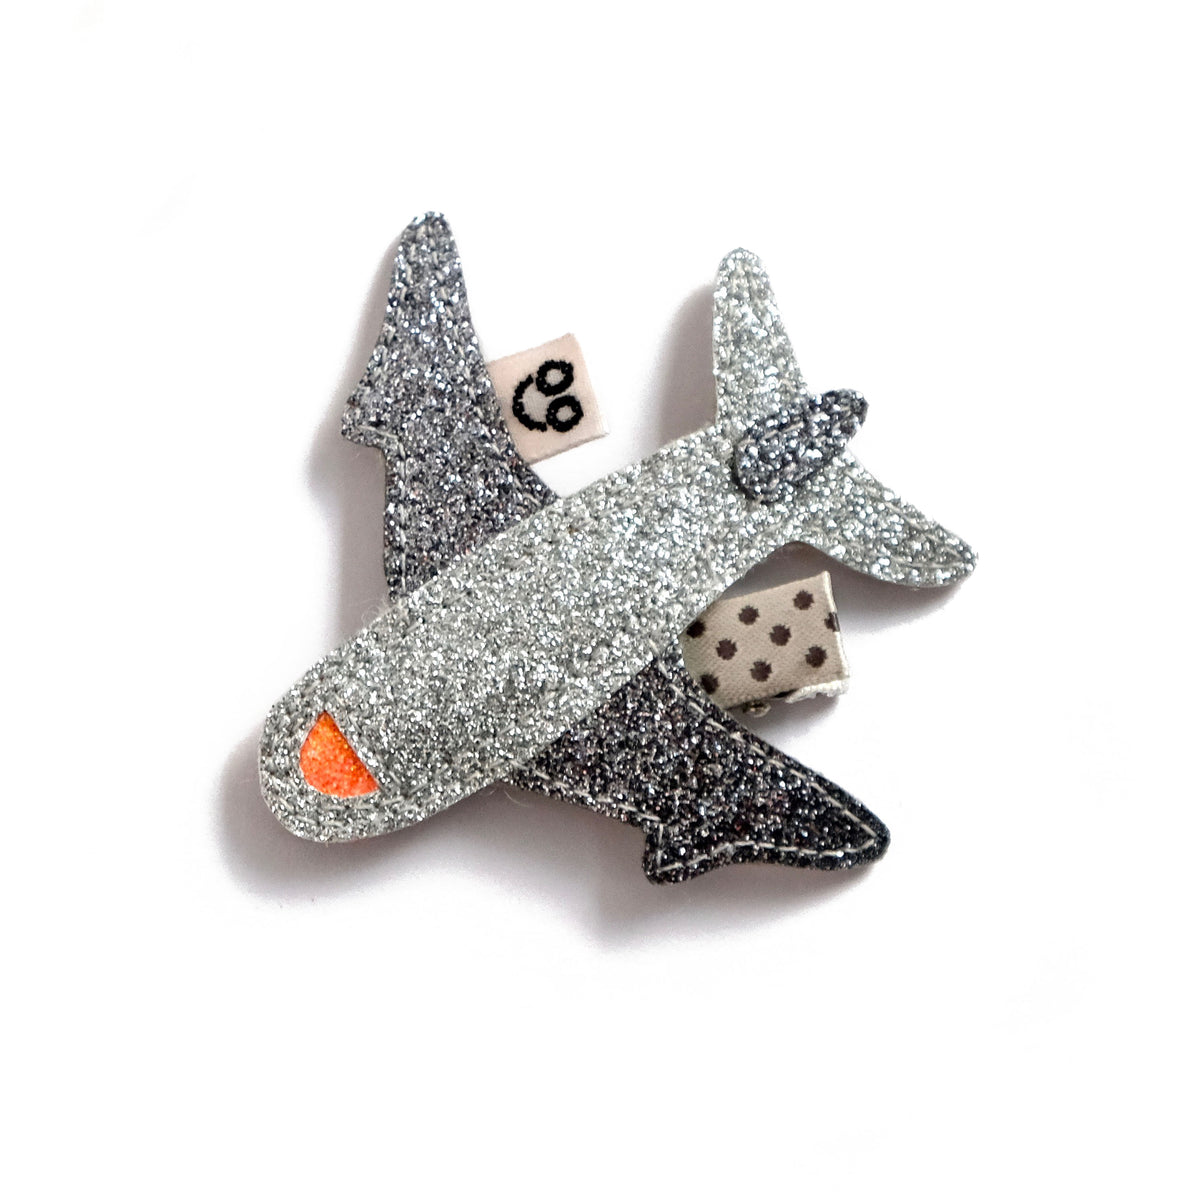 Silver hair clip airplane for fashionable toddler girls.